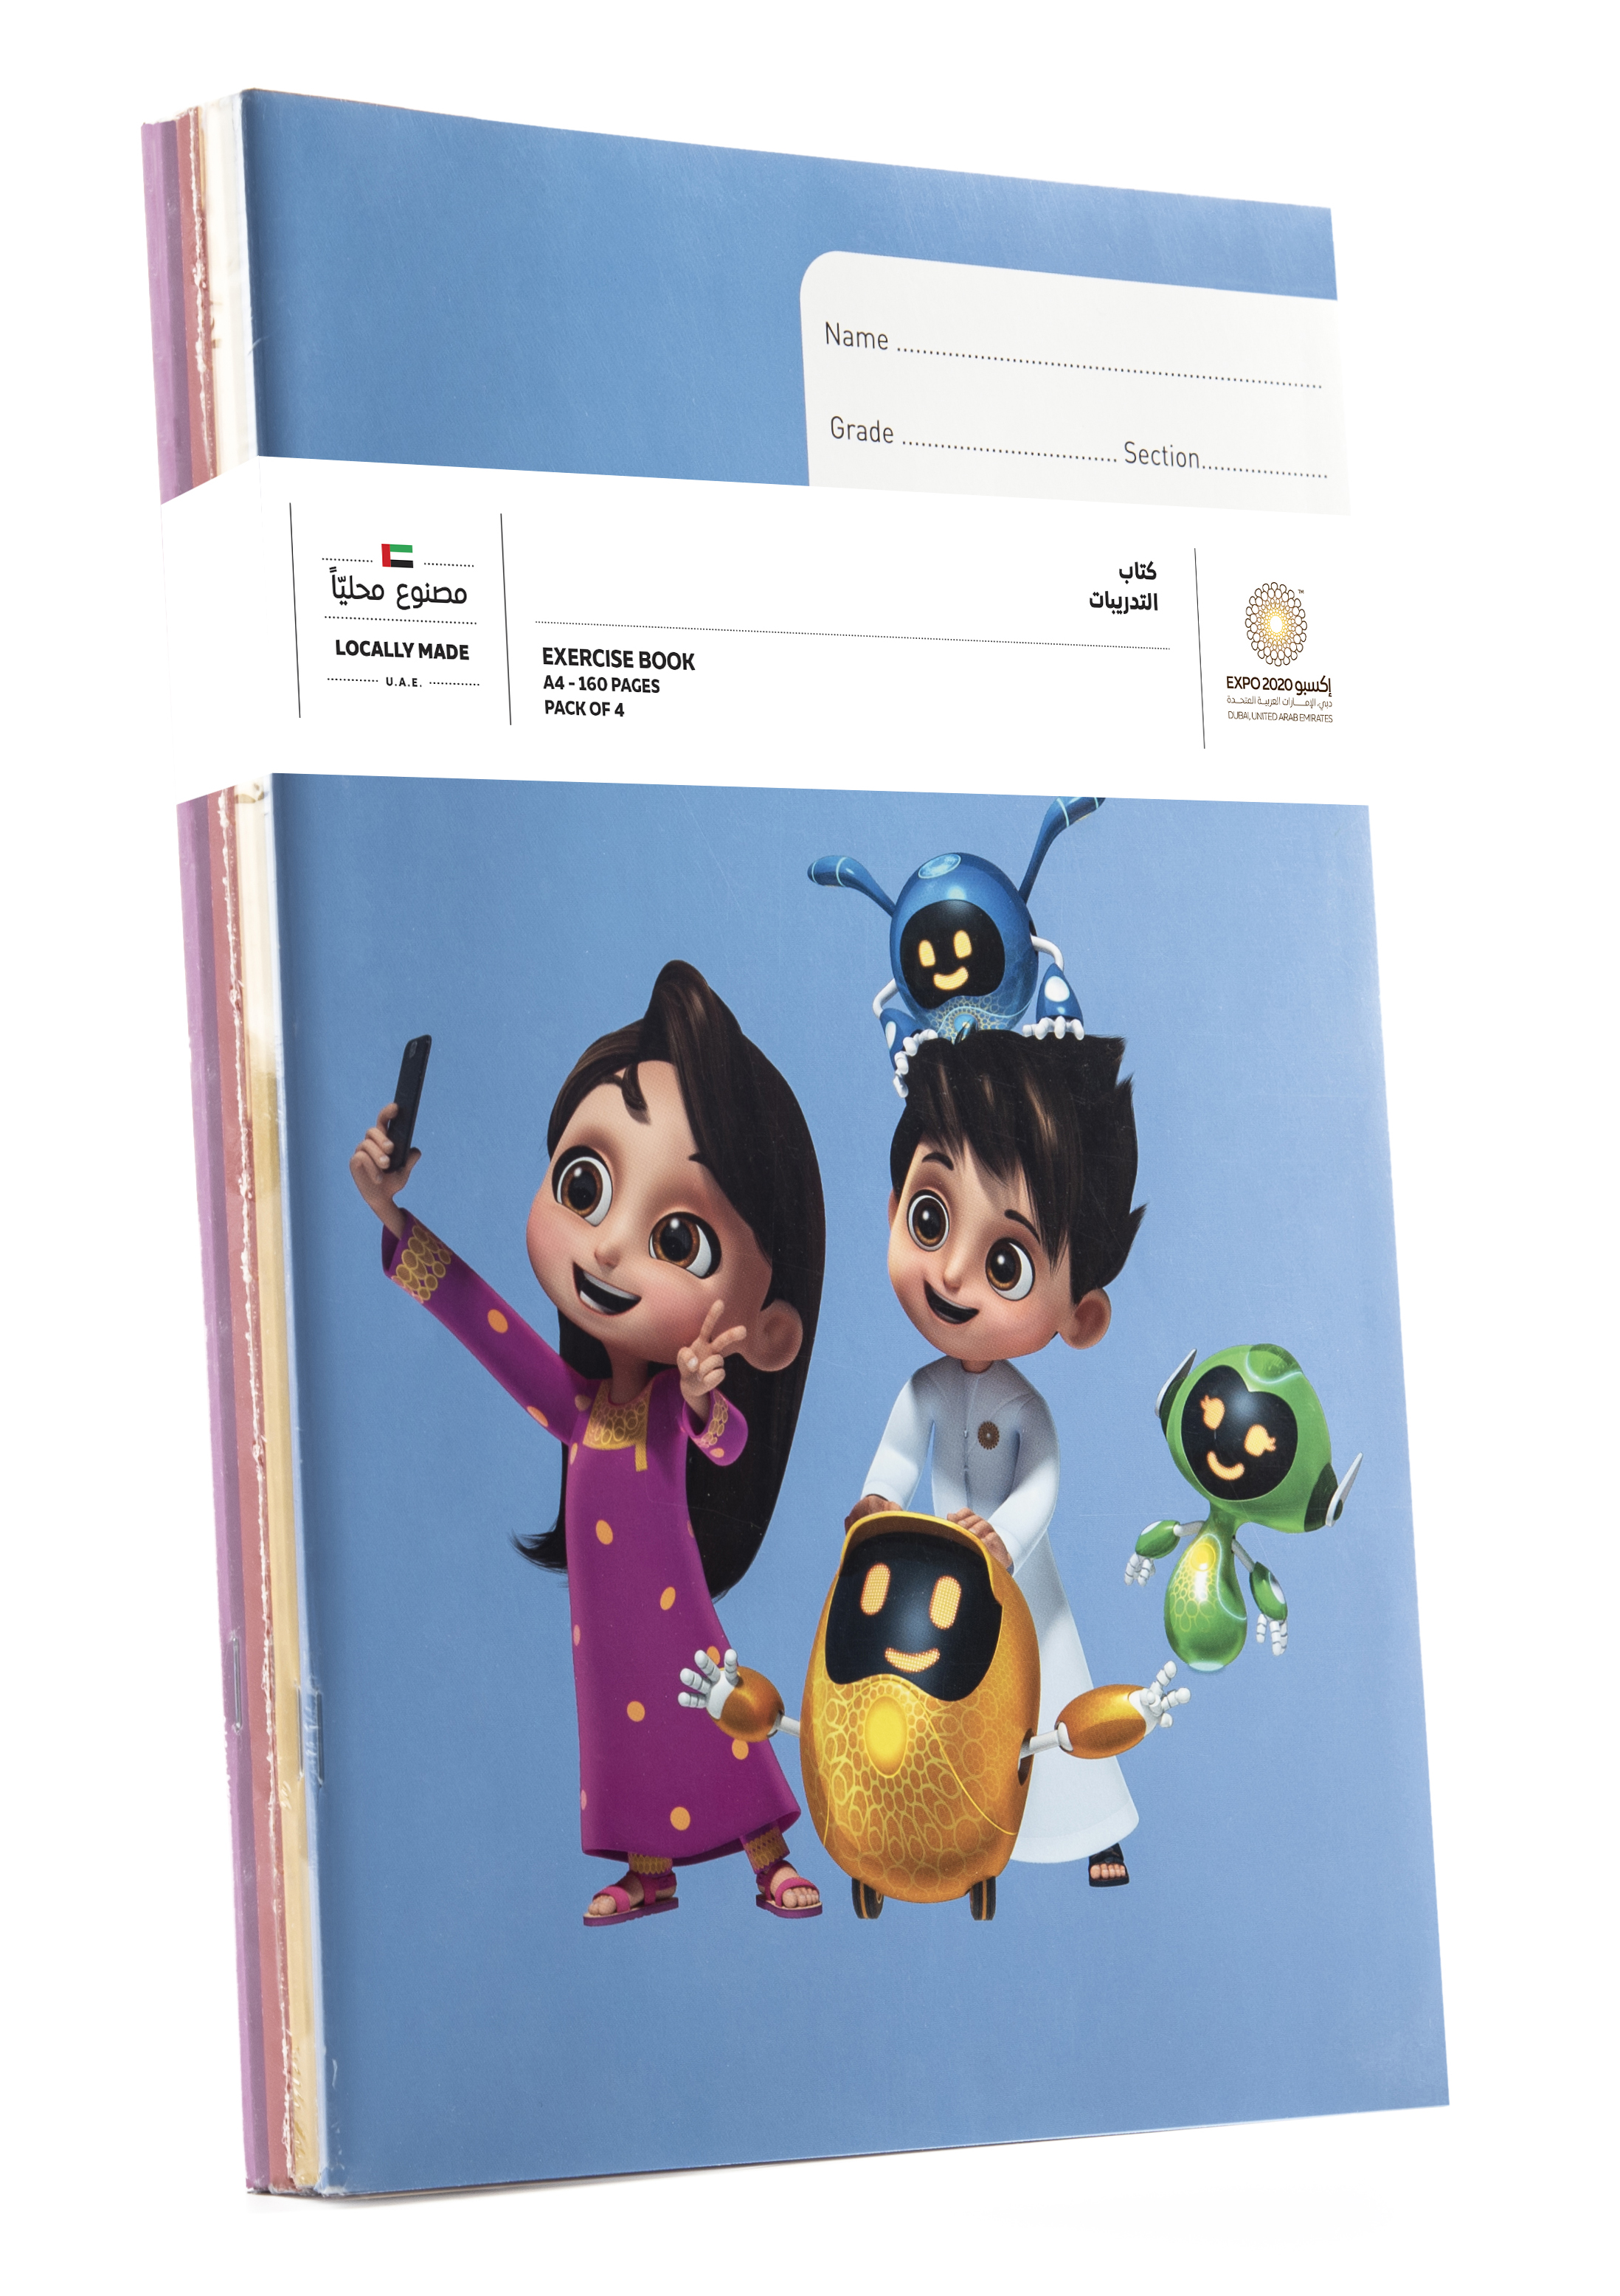 Expo 2020 Dubai Mascots A4 Exercise Books Pack of 4 - 160 Pages